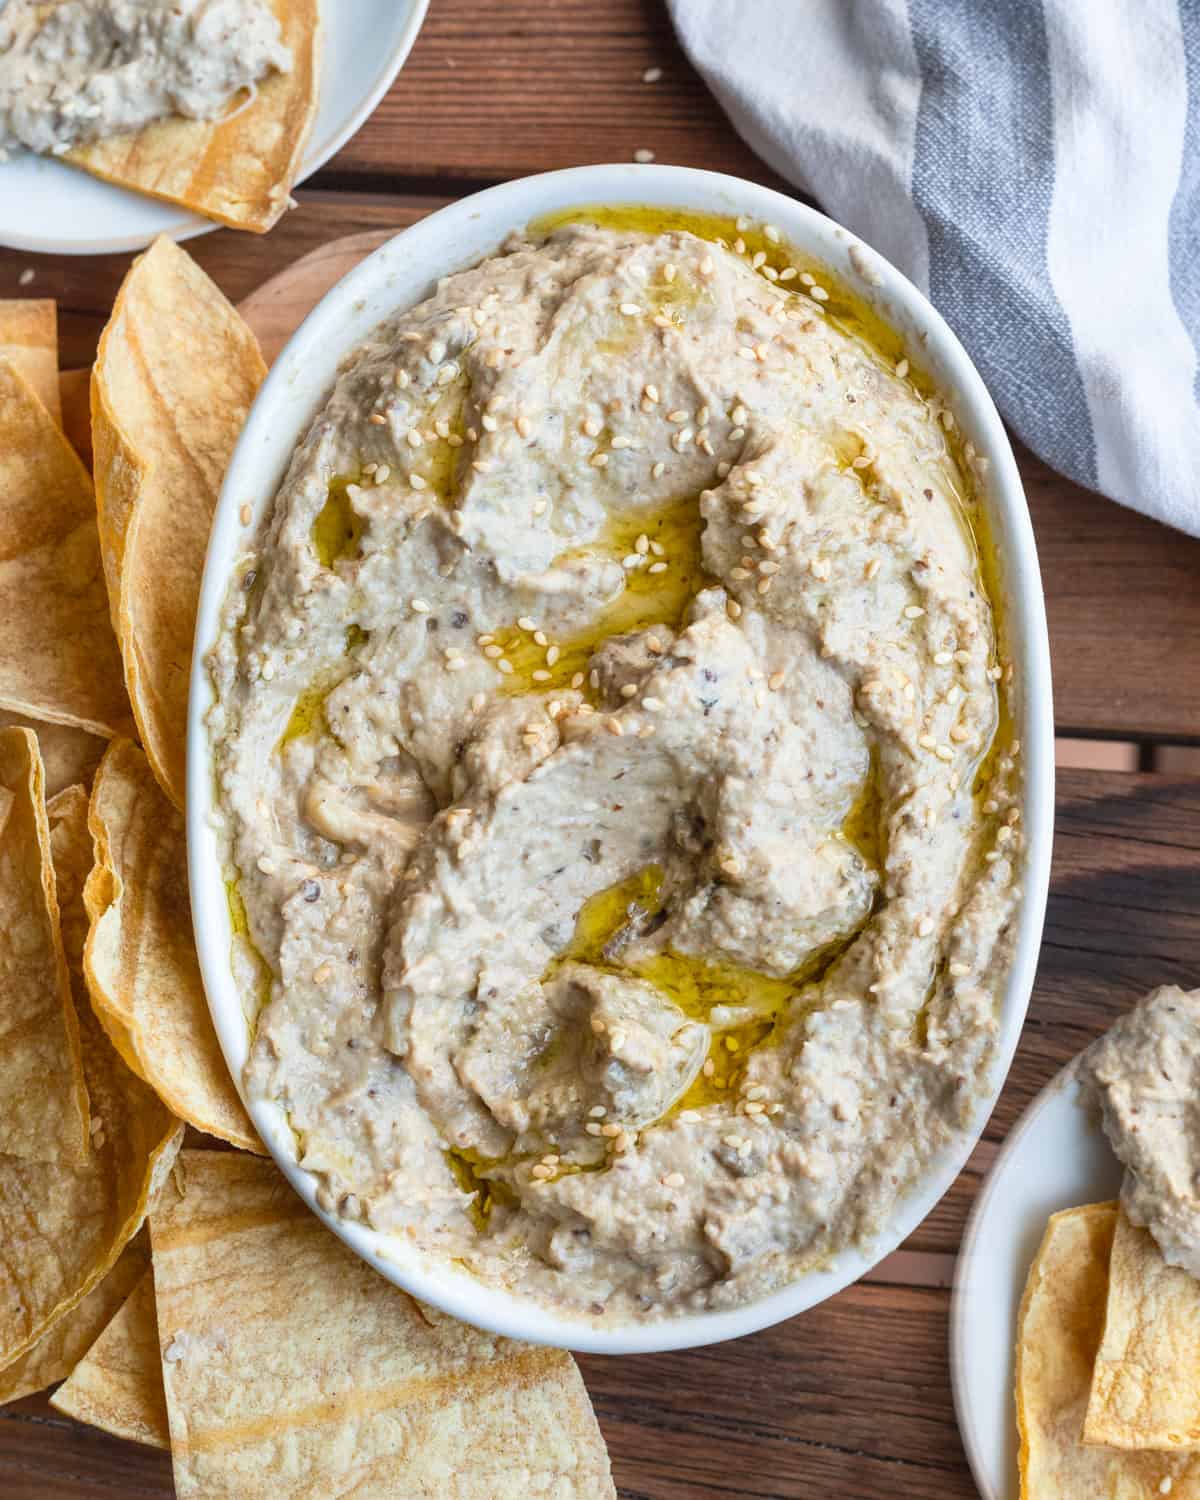 An inviting bowl of baba ganoush with a rich drizzle of olive oil and sesame seeds, served with pita chips, on a rustic wooden table.